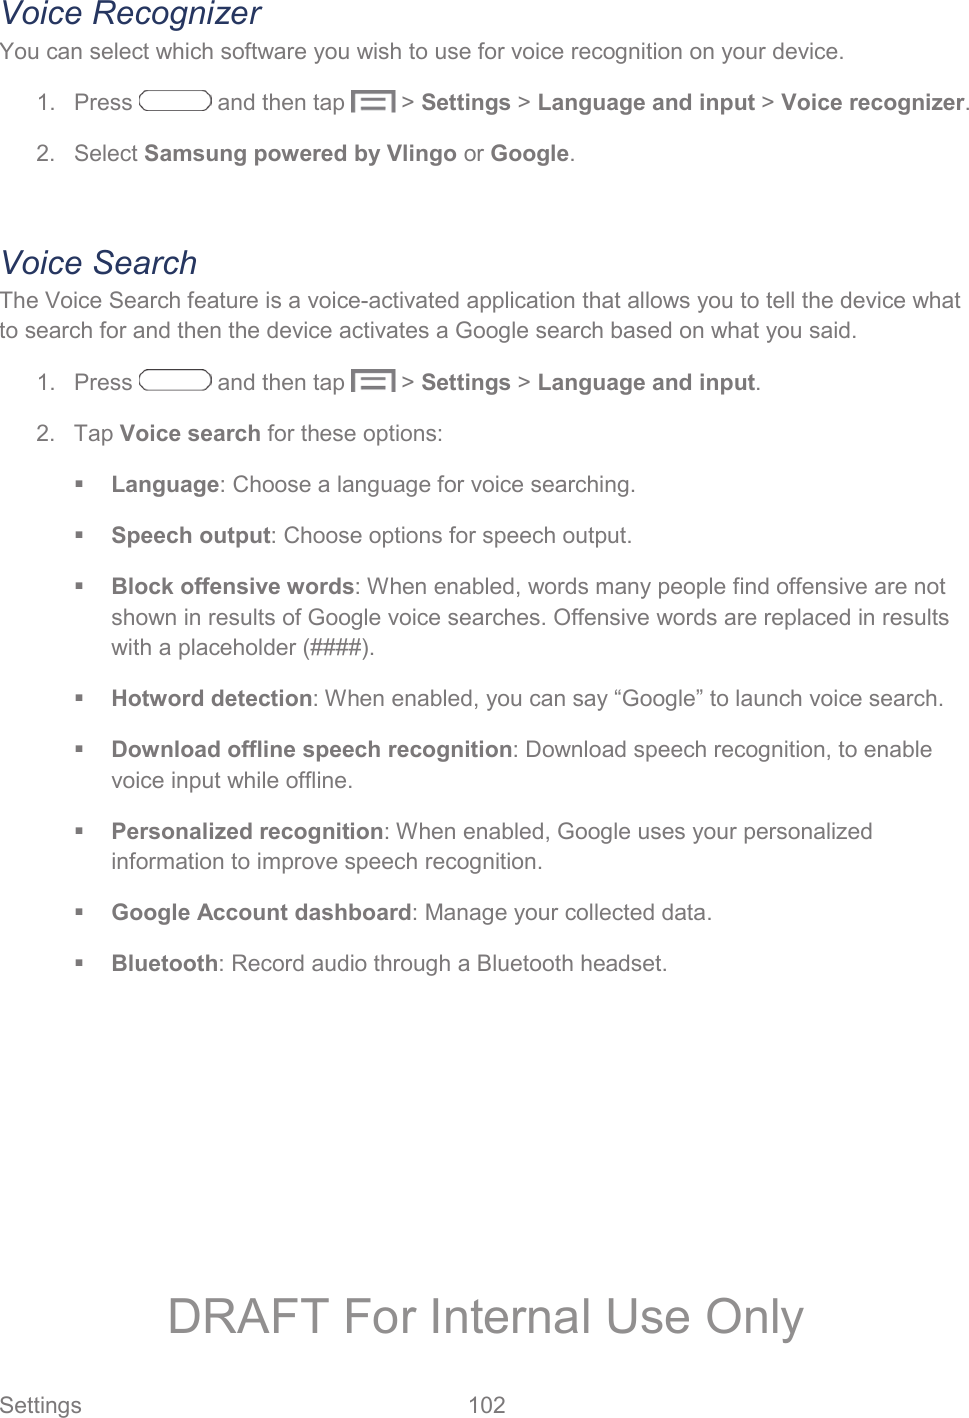  Settings  102   Voice Recognizer You can select which software you wish to use for voice recognition on your device. 1.  Press   and then tap   &gt; Settings &gt; Language and input &gt; Voice recognizer. 2. Select Samsung powered by Vlingo or Google.  Voice Search The Voice Search feature is a voice-activated application that allows you to tell the device what to search for and then the device activates a Google search based on what you said. 1.  Press   and then tap   &gt; Settings &gt; Language and input. 2. Tap Voice search for these options:  Language: Choose a language for voice searching.  Speech output: Choose options for speech output.  Block offensive words: When enabled, words many people find offensive are not shown in results of Google voice searches. Offensive words are replaced in results with a placeholder (####).  Hotword detection: When enabled, you can say “Google” to launch voice search.  Download offline speech recognition: Download speech recognition, to enable voice input while offline.  Personalized recognition: When enabled, Google uses your personalized information to improve speech recognition.  Google Account dashboard: Manage your collected data.  Bluetooth: Record audio through a Bluetooth headset. DRAFT For Internal Use Only